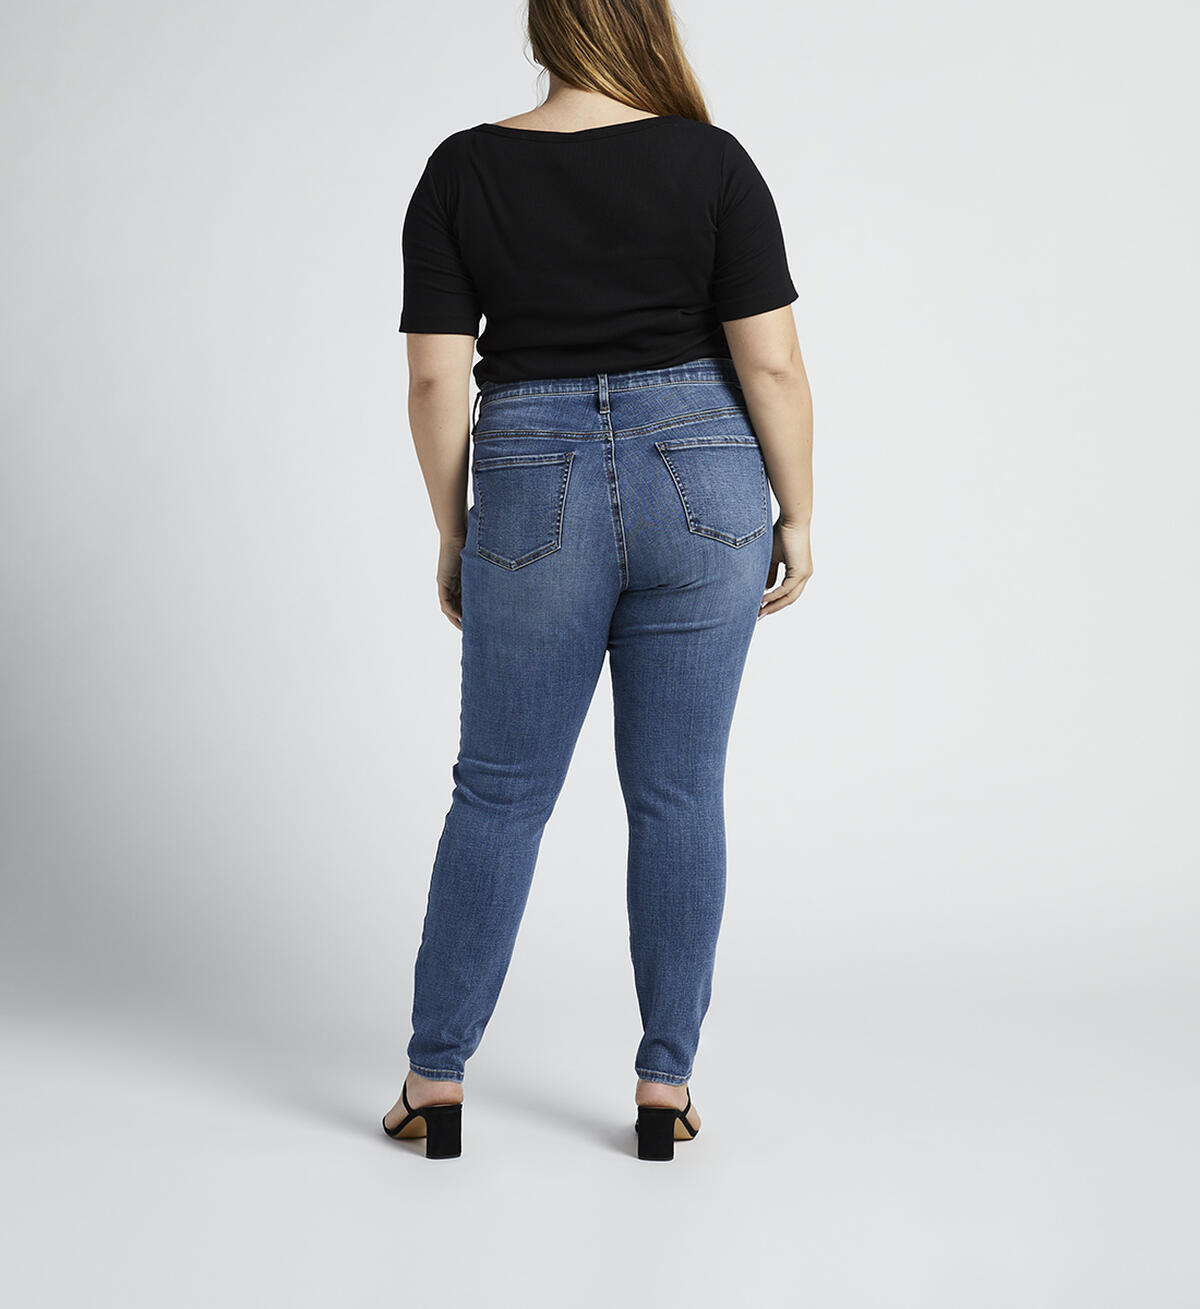 Cecilia Mid Rise Skinny Jeans Plus Size, , hi-res image number 1